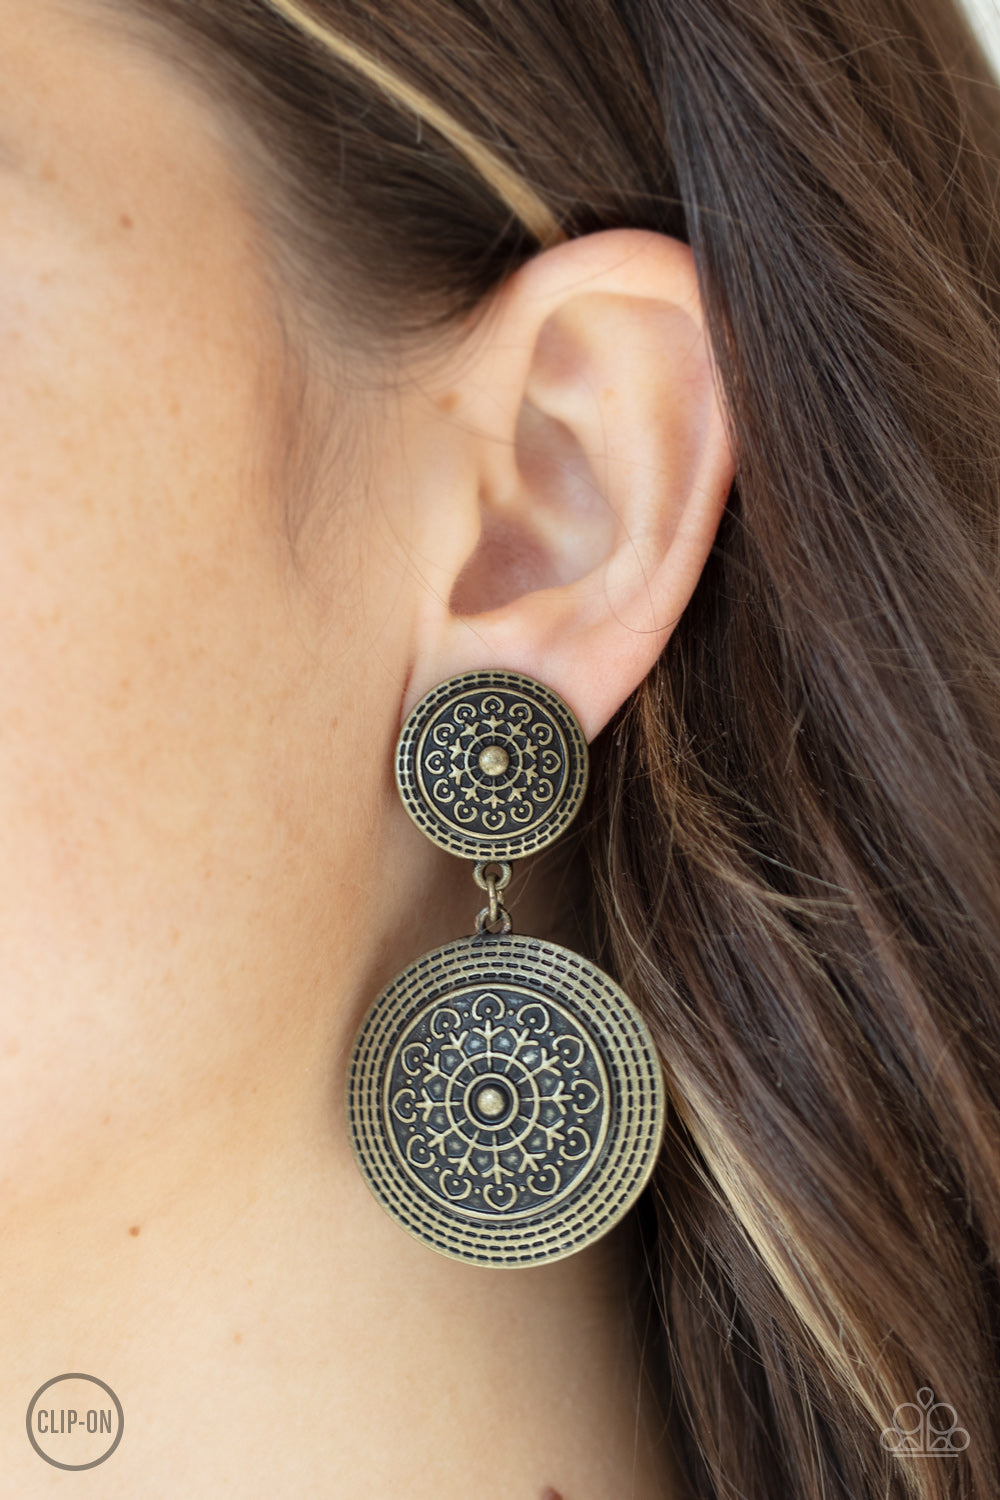 Paparazzi Accessories Magnificent Medallions - Brass Clip-On Earrings - Lady T Accessories